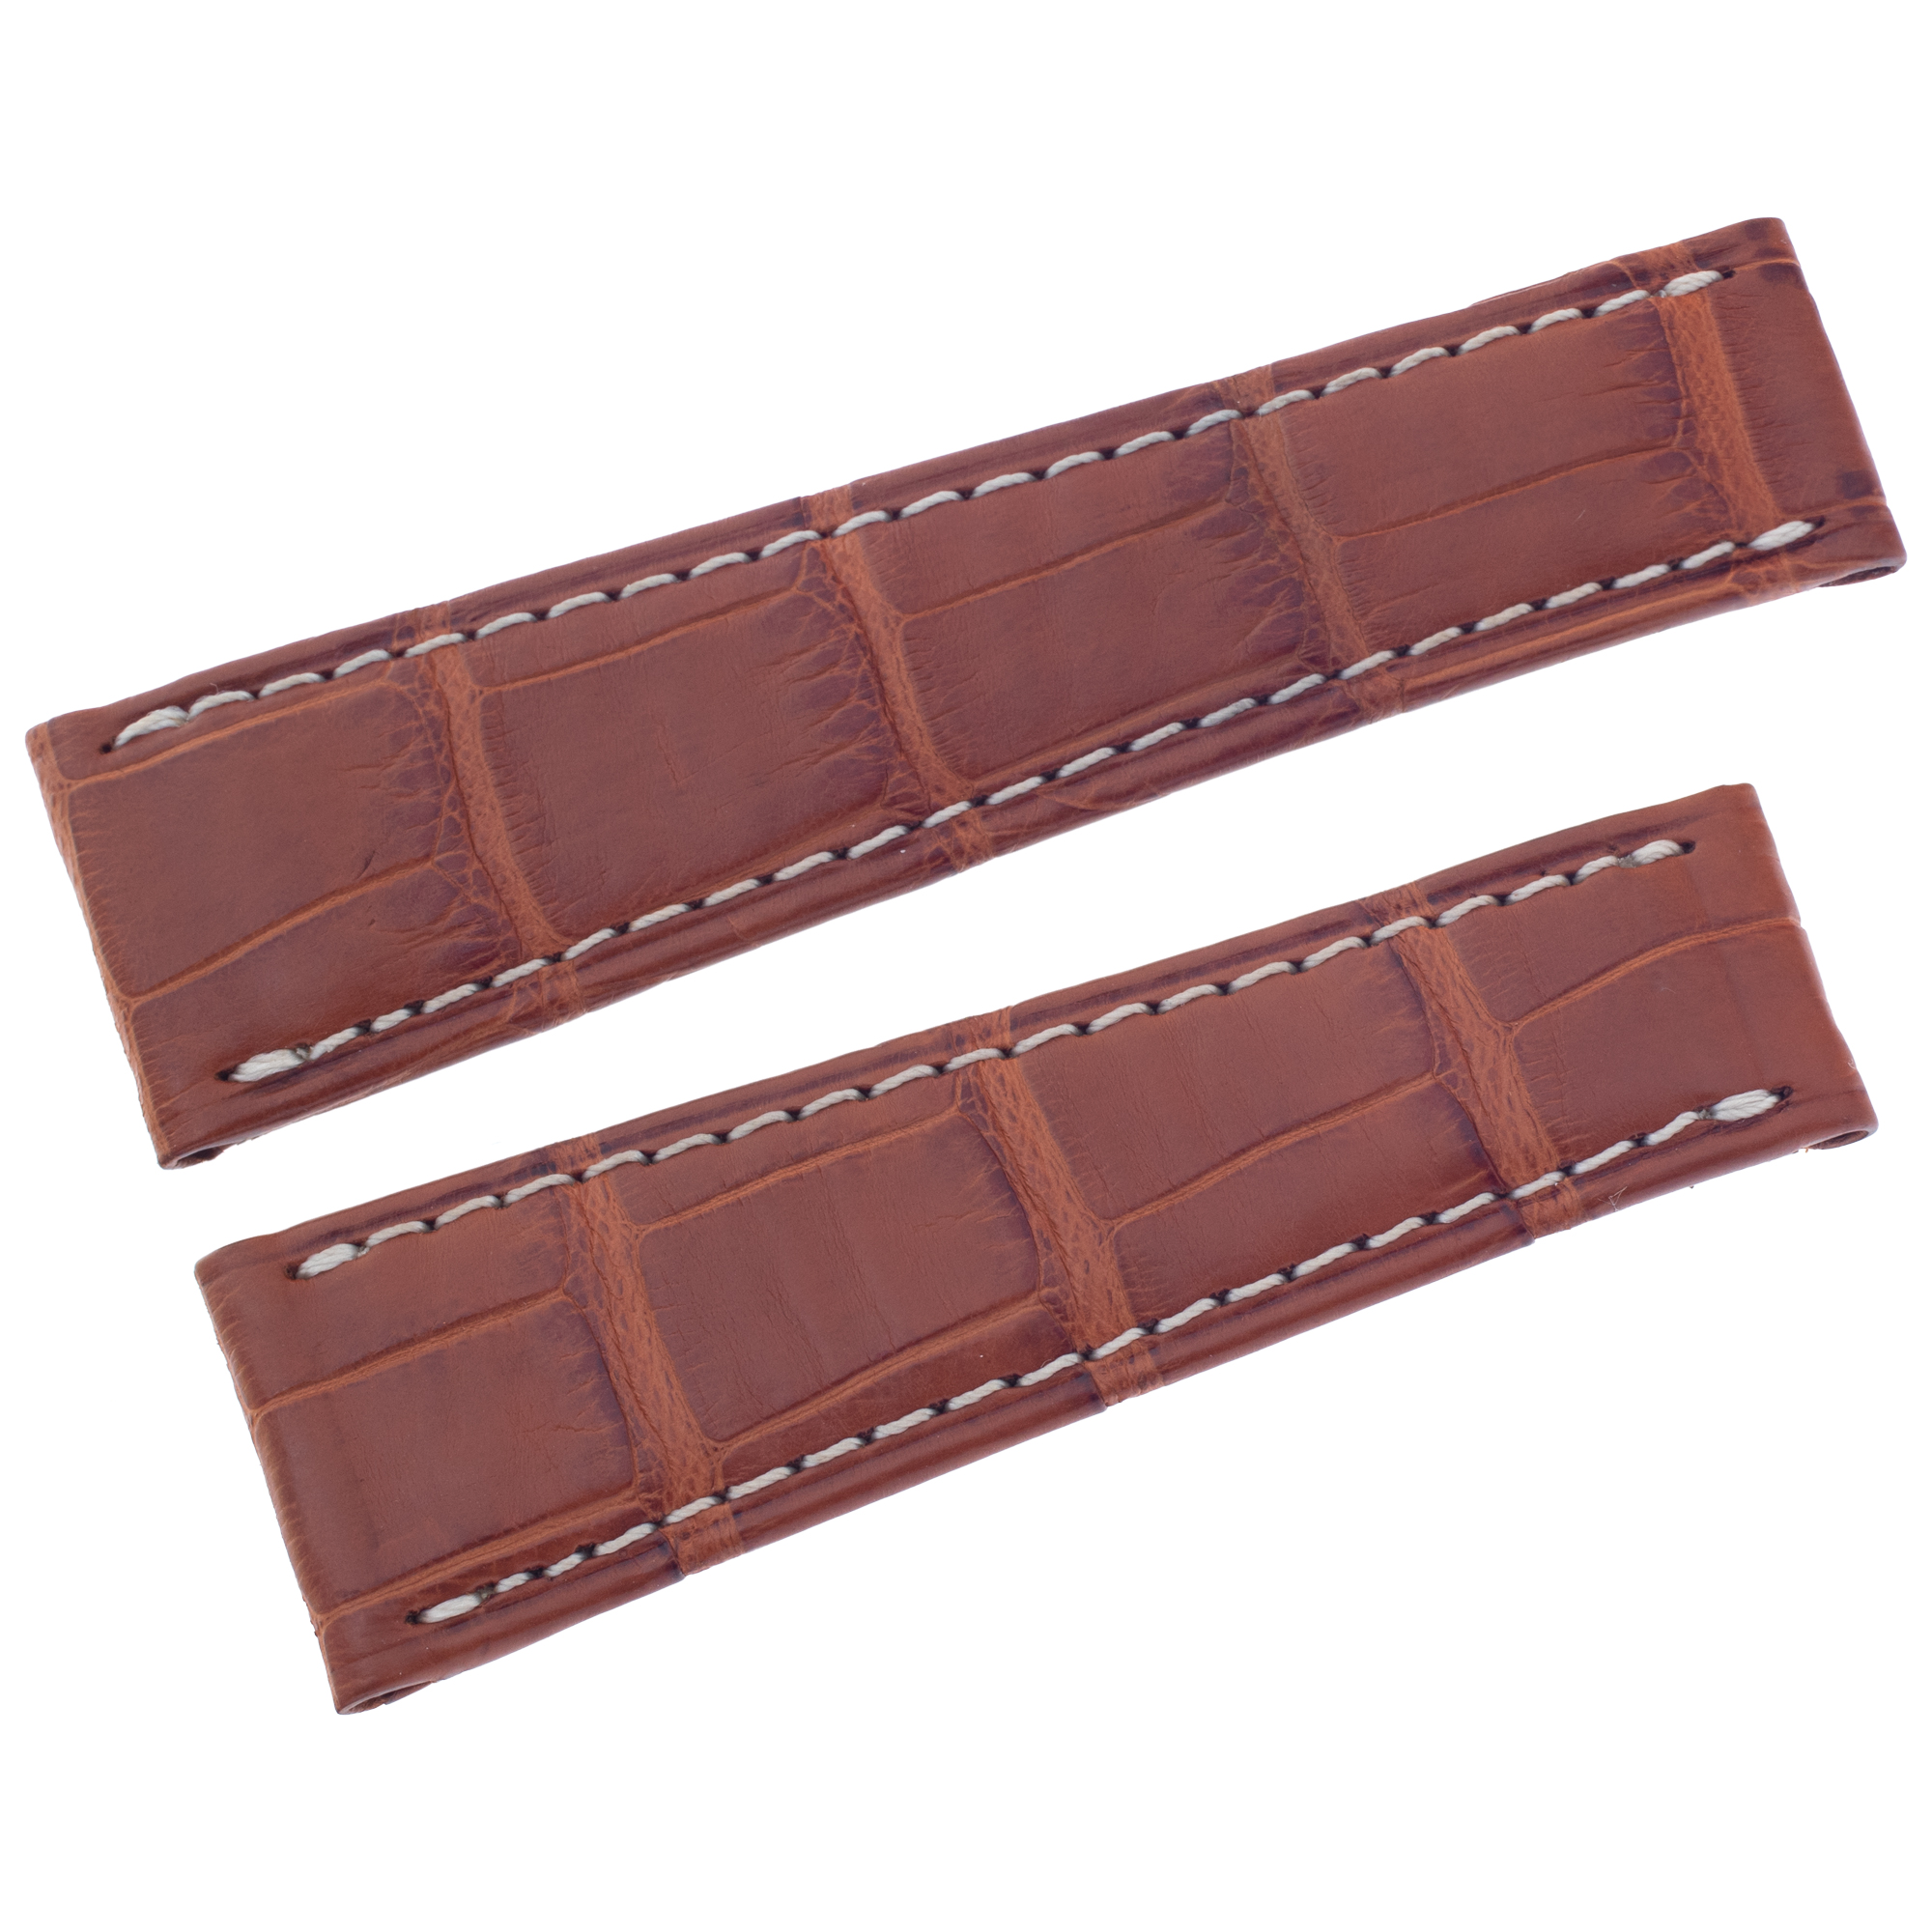 Rolex Daytona Brown alligator watch band (20 x 16). 20mm width by the lug end and 16 mm width by the buckle end. Length: 3" long piece and 2.5" short piece.